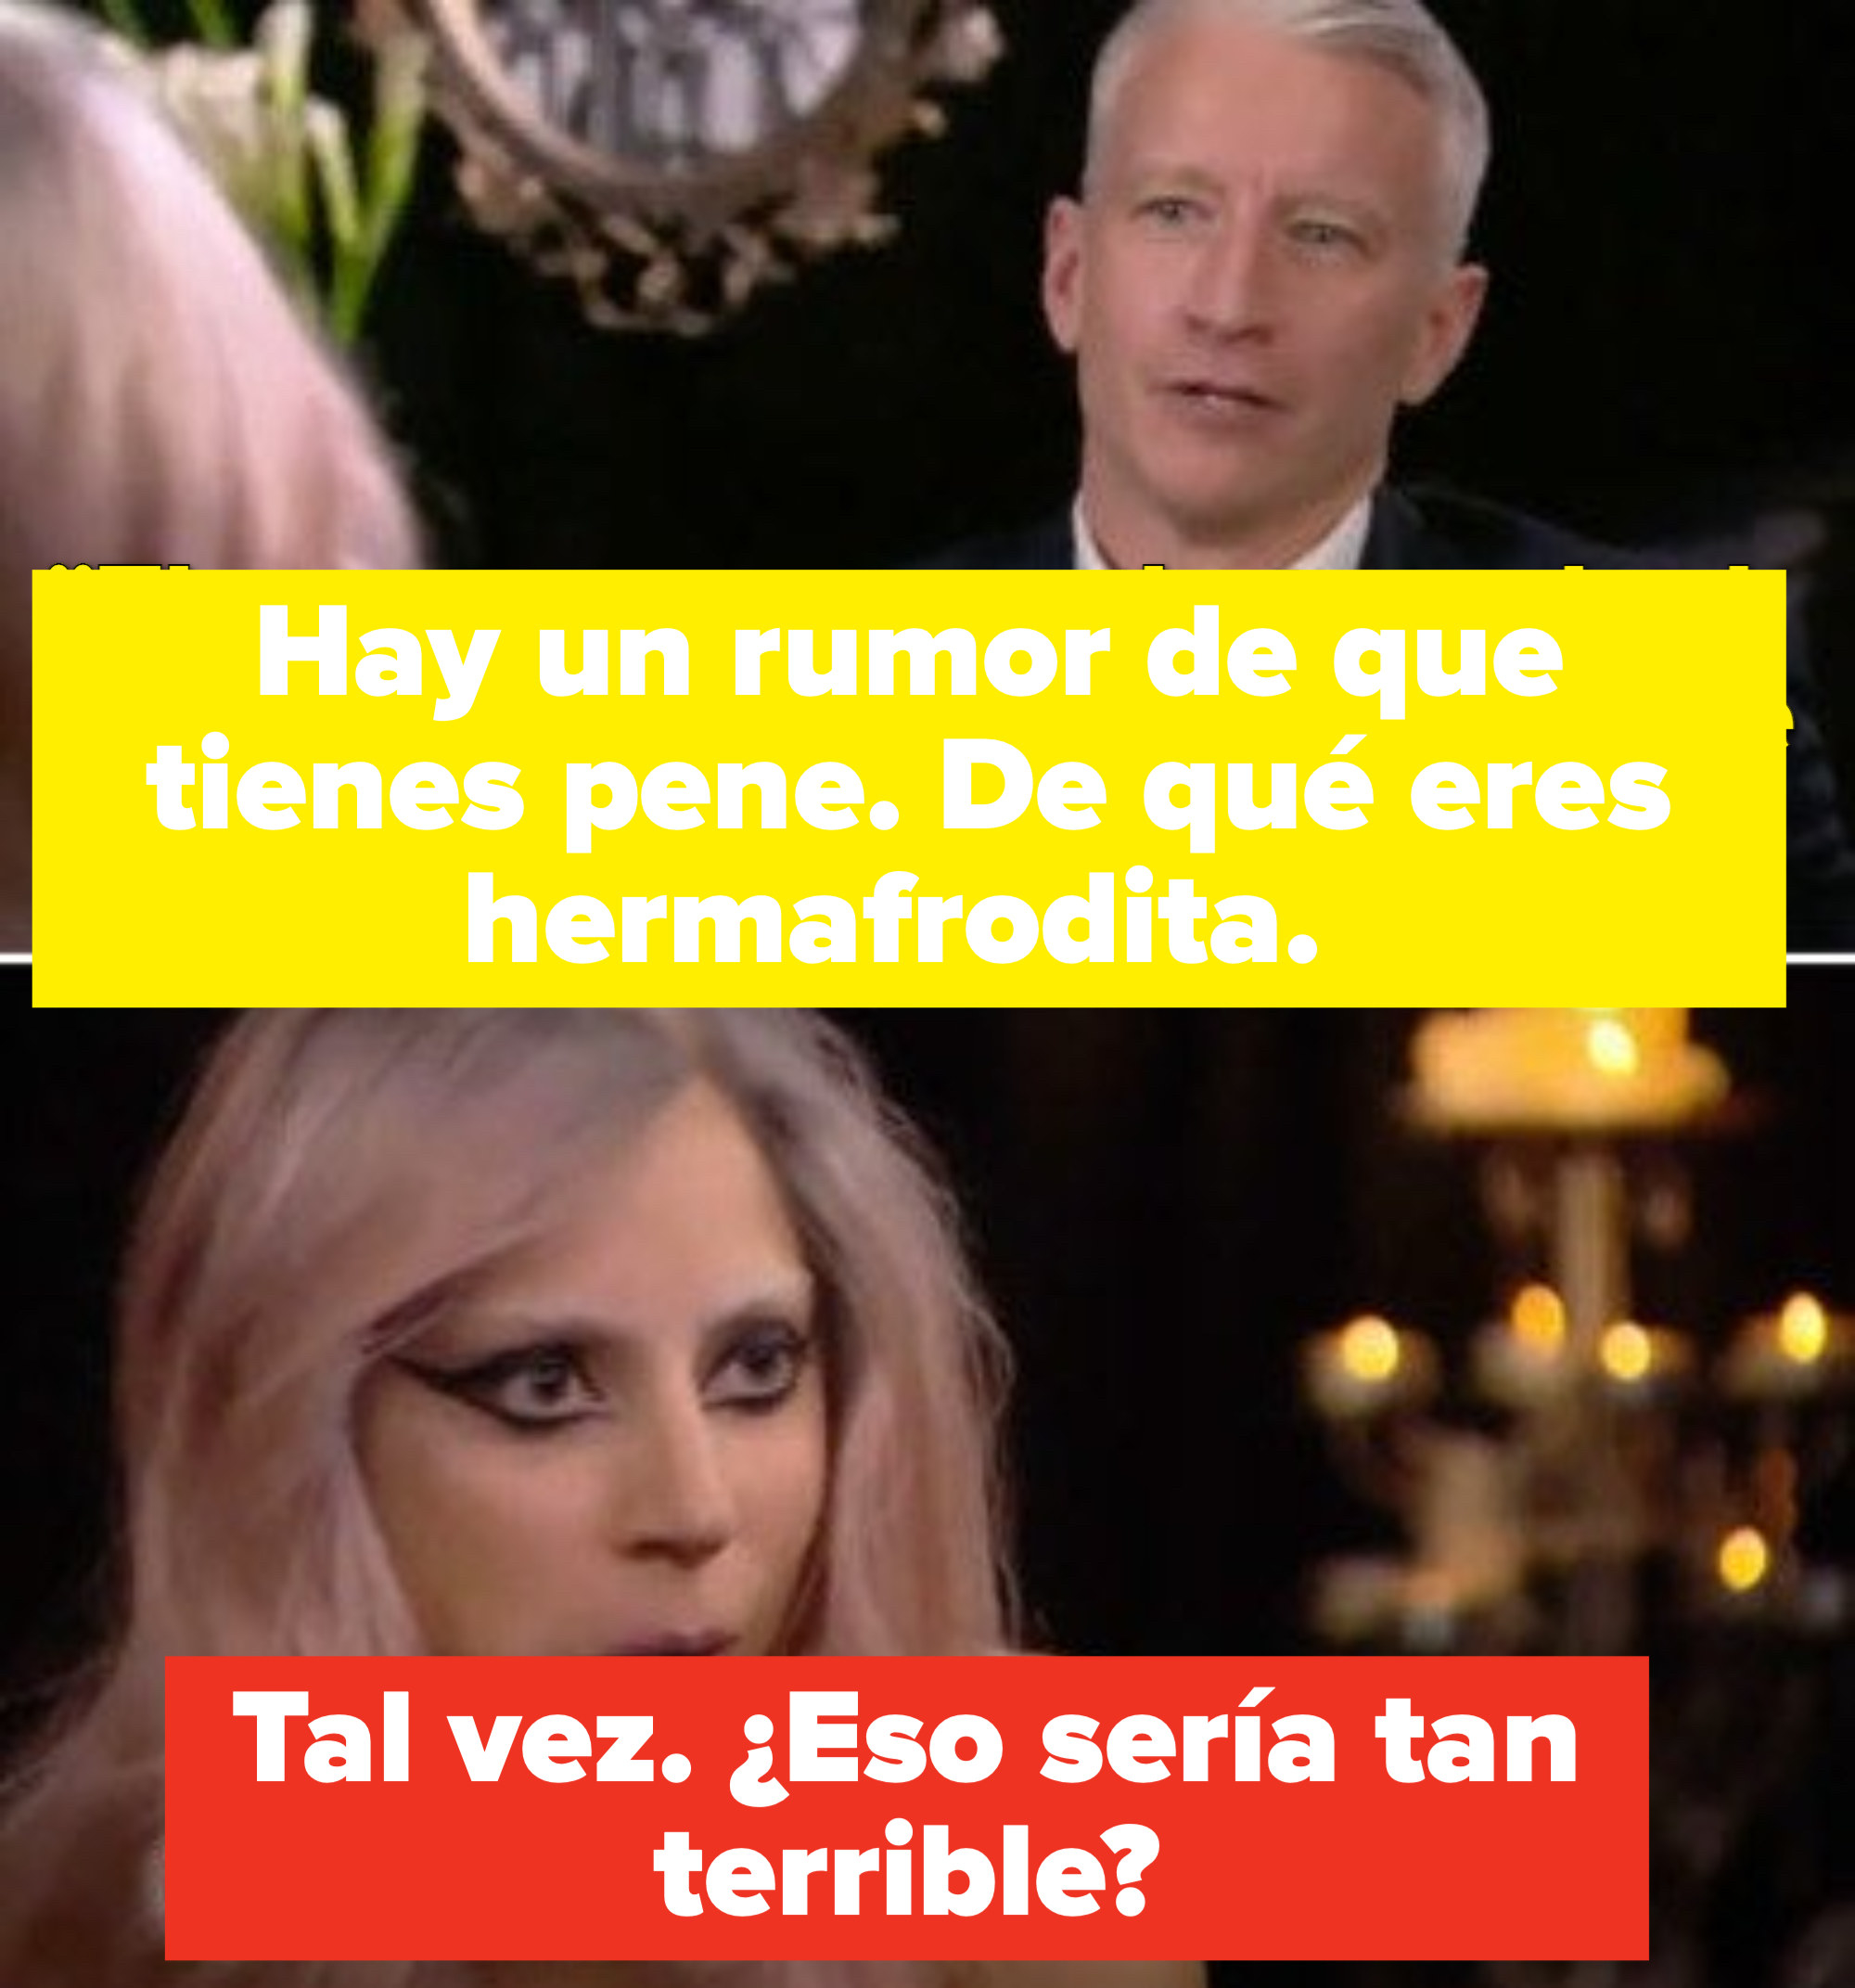 Anderson Cooper bringing up rumors about Lady Gaga having a penis